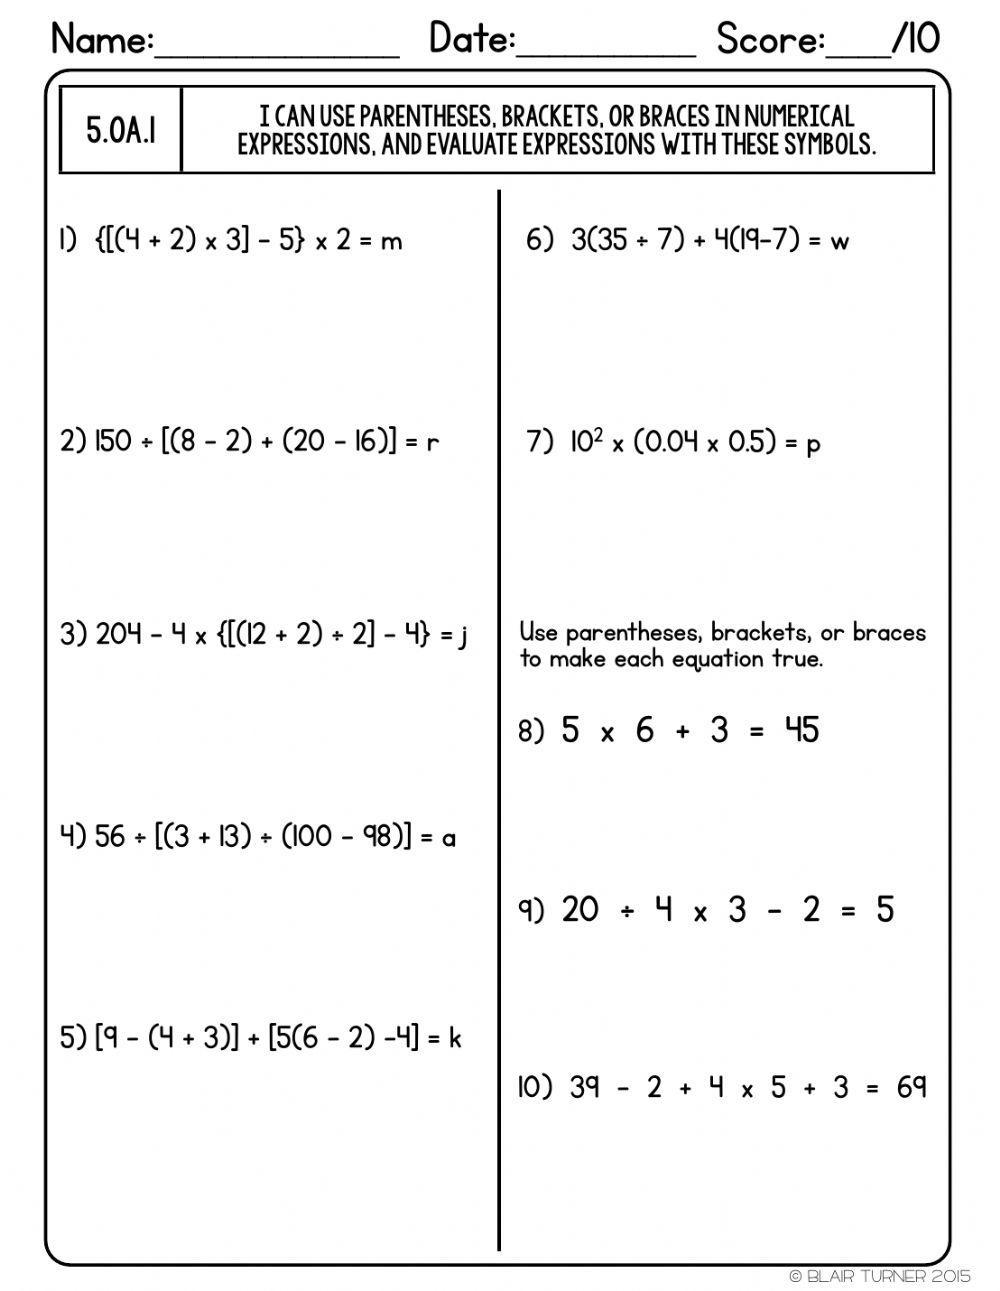 Parantheses -Order of Operations